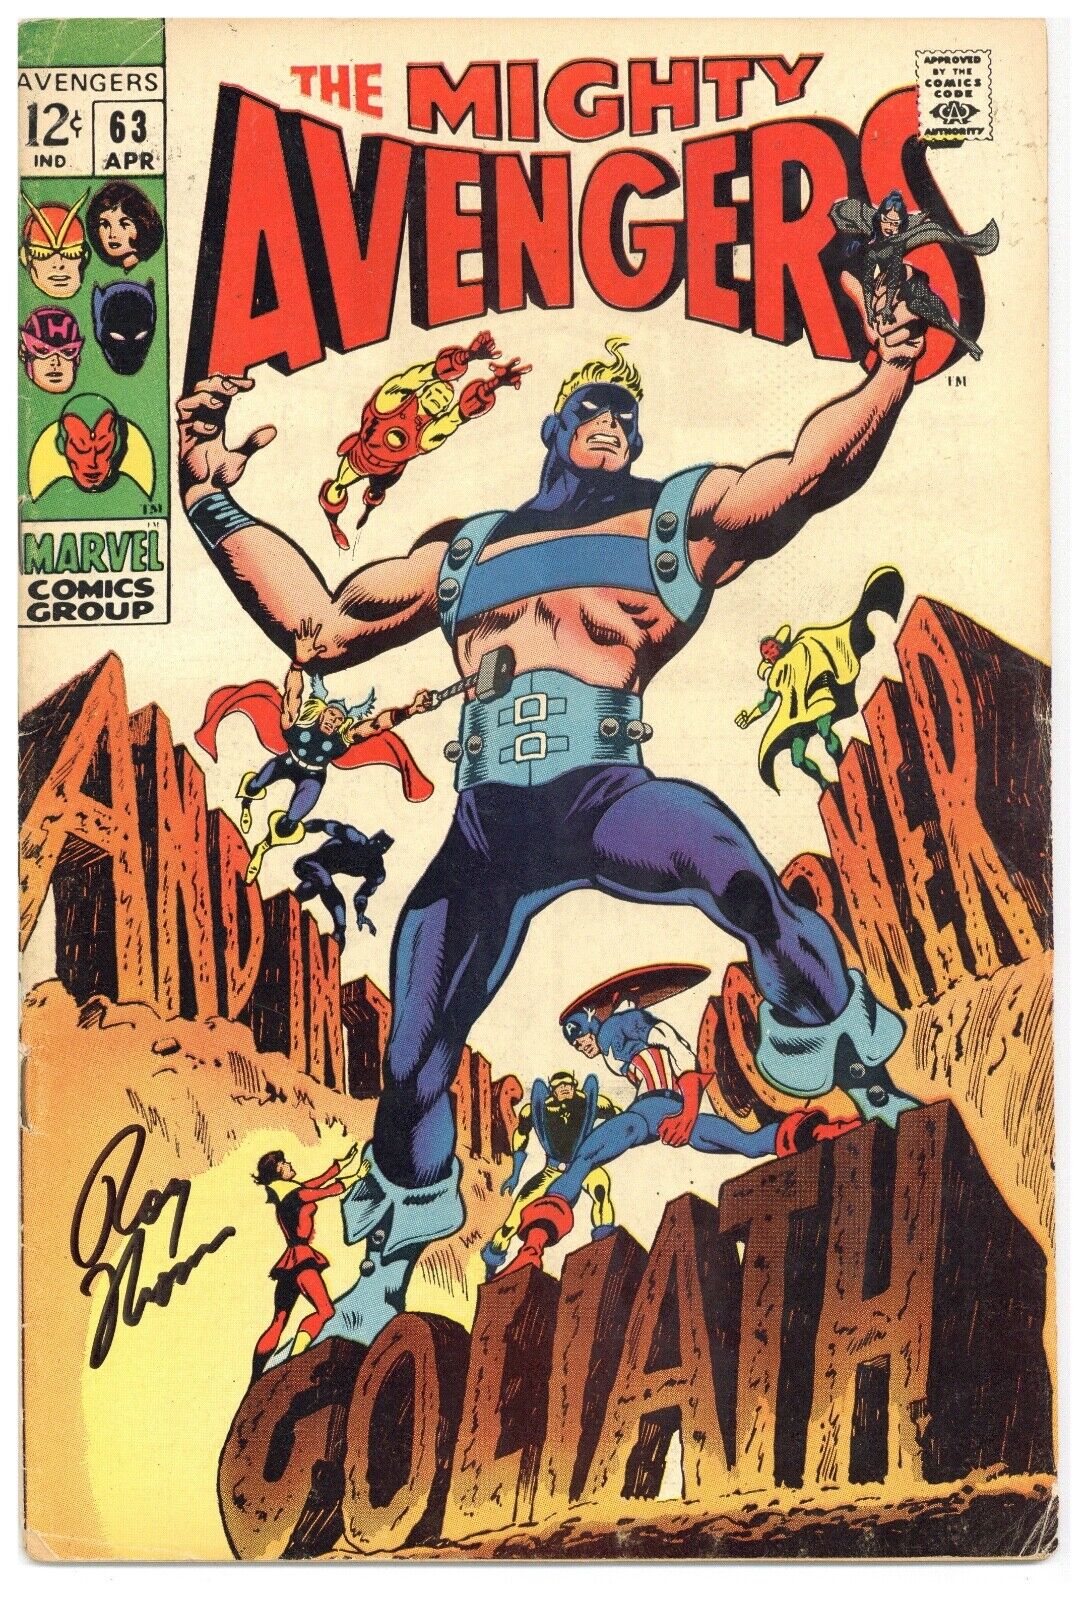 Avengers  # 63   VERY GOOD FINE    VERY GOOD FINE   SIGNED by Roy Thomas   1969